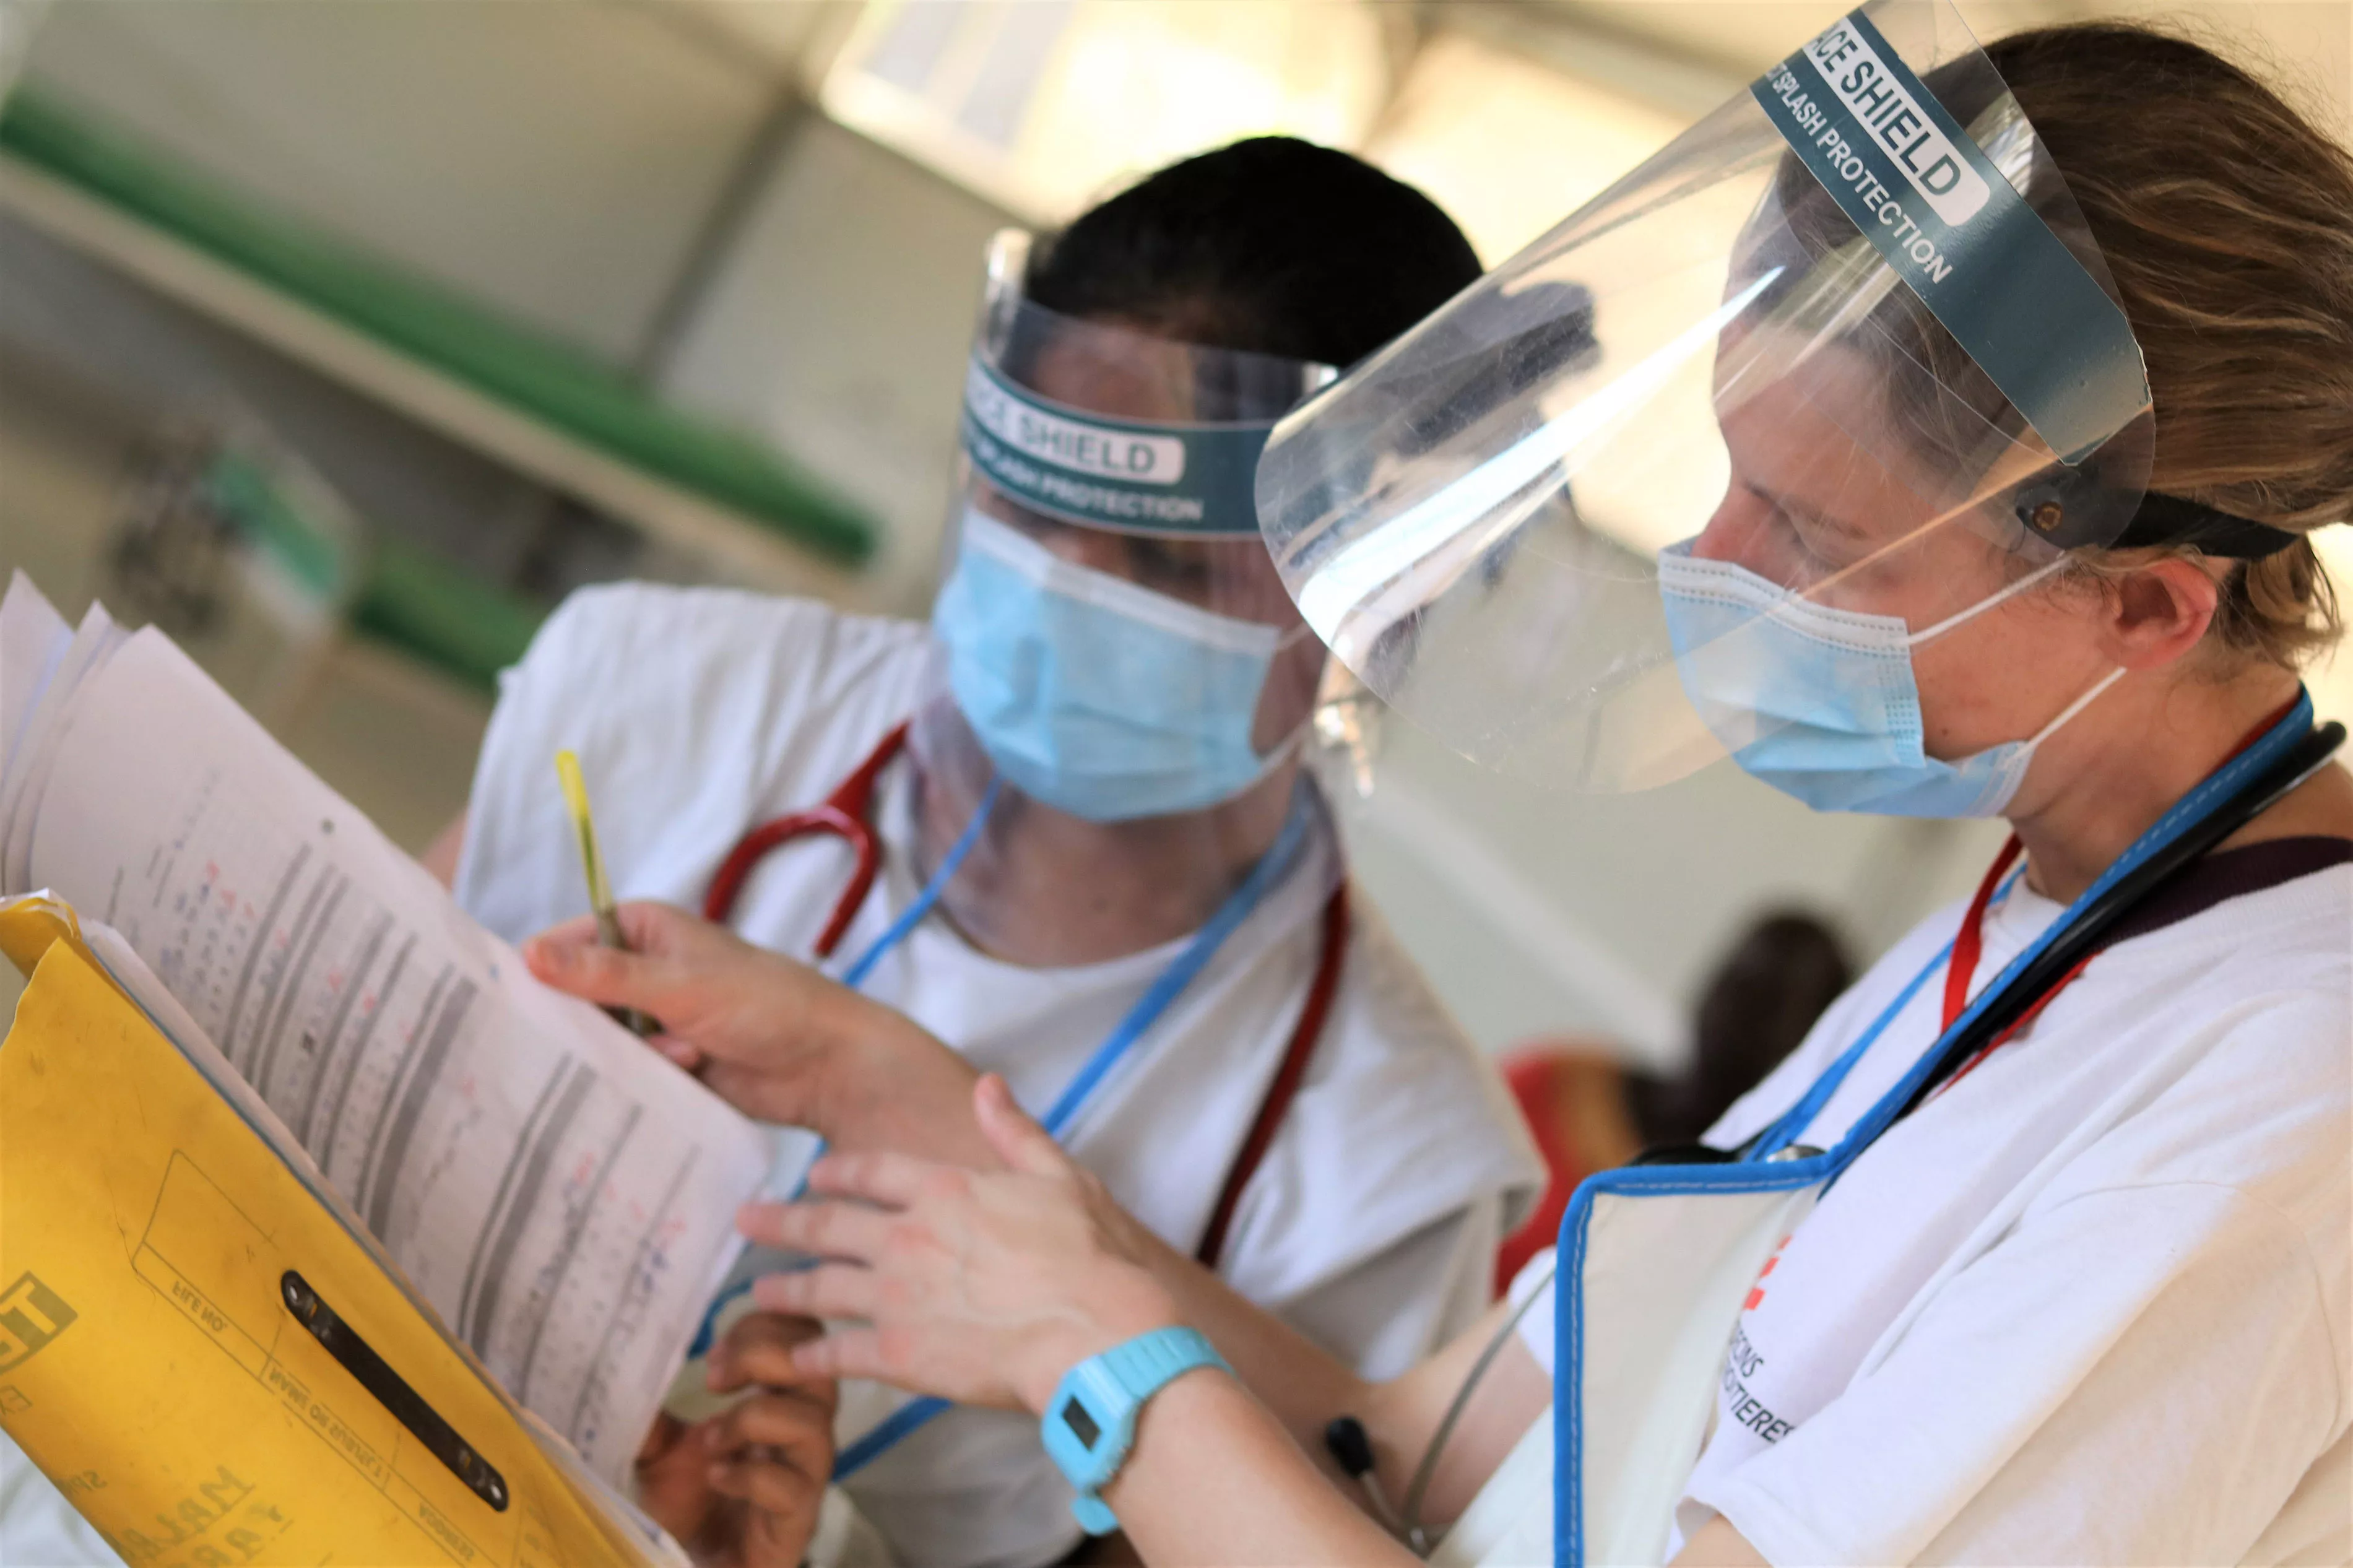 MSF’s medical staff review patient files during the ward round in the MSF Hospital in the Bentiu Protection of Civilian (PoC) site. Since the COVID-19 pandemic reached South Sudan, MSF has to reduce its inpatient bed capacity to adhere to preventive measures.